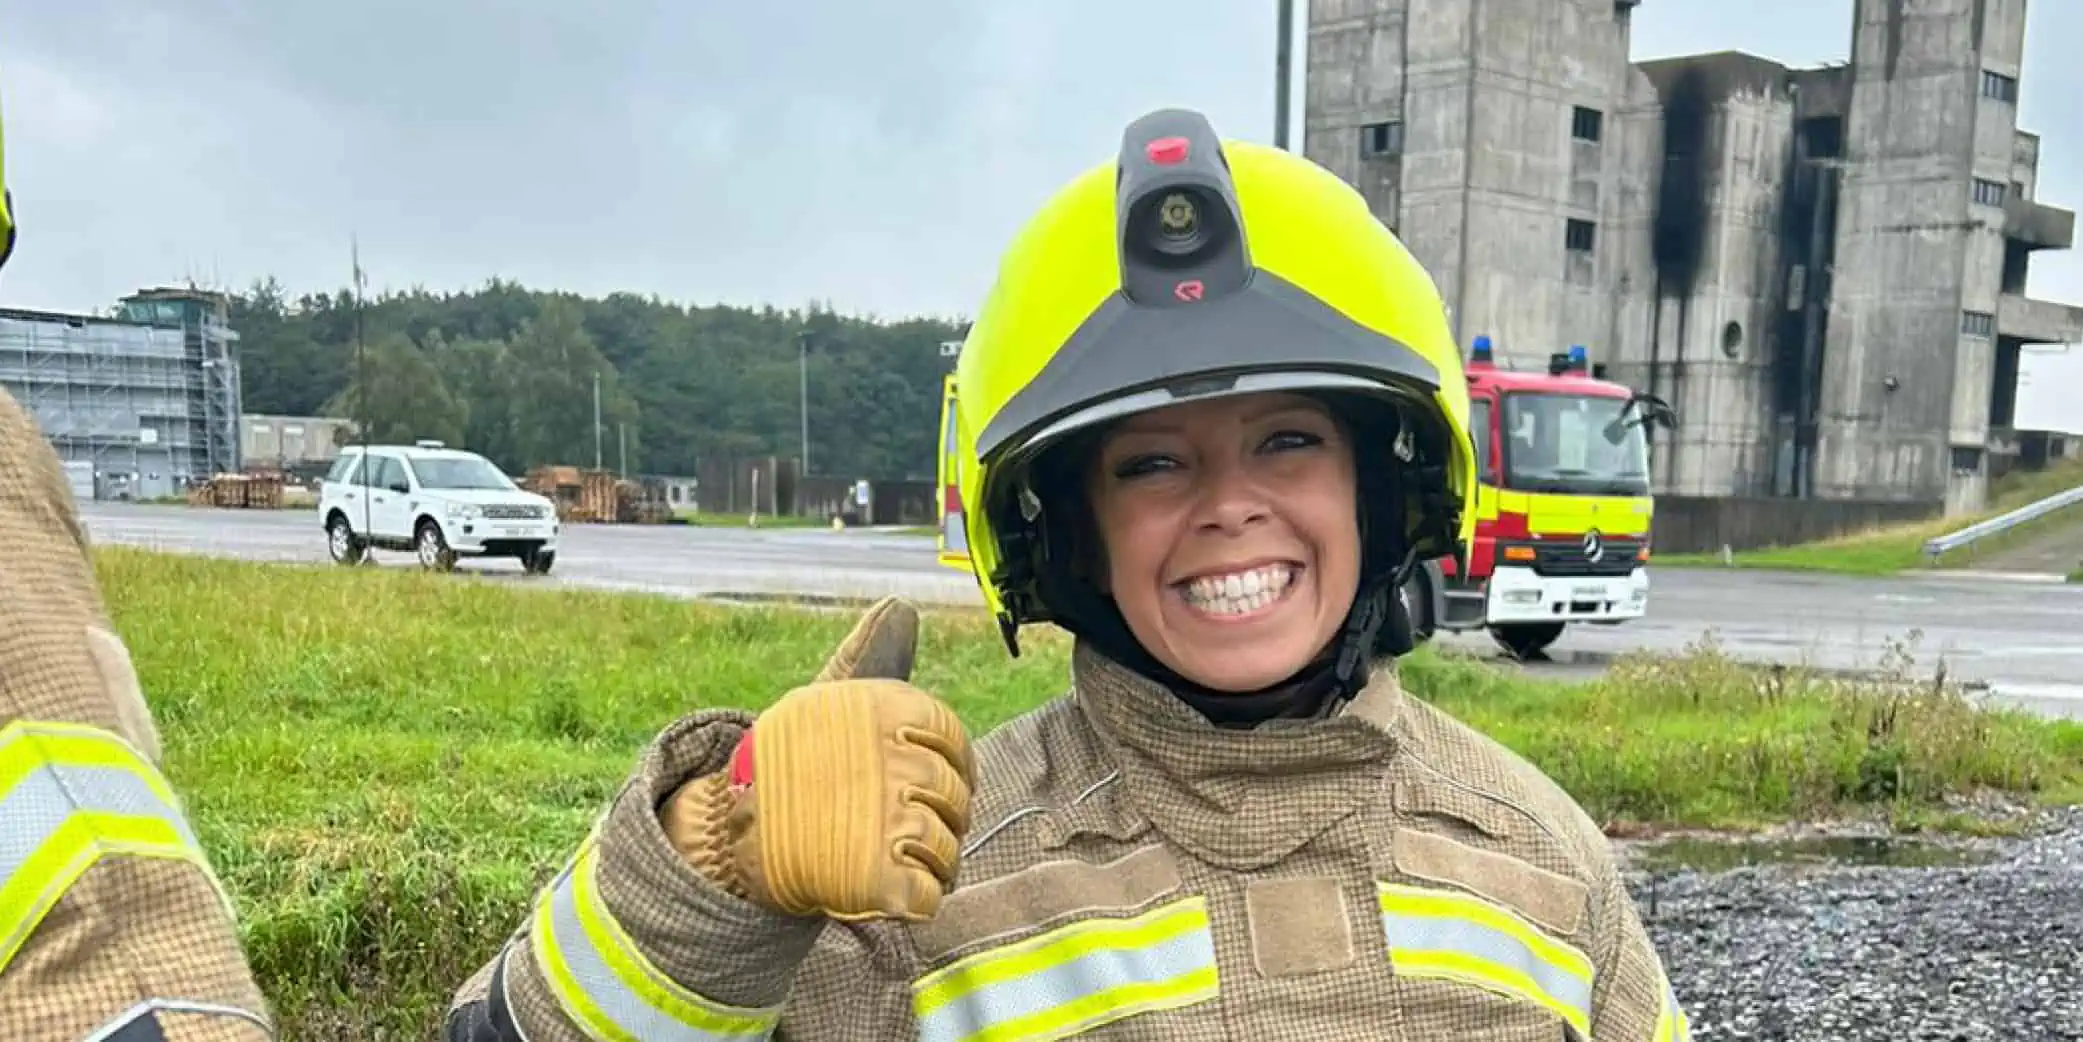 Firefighter with thumbs up at training exercise